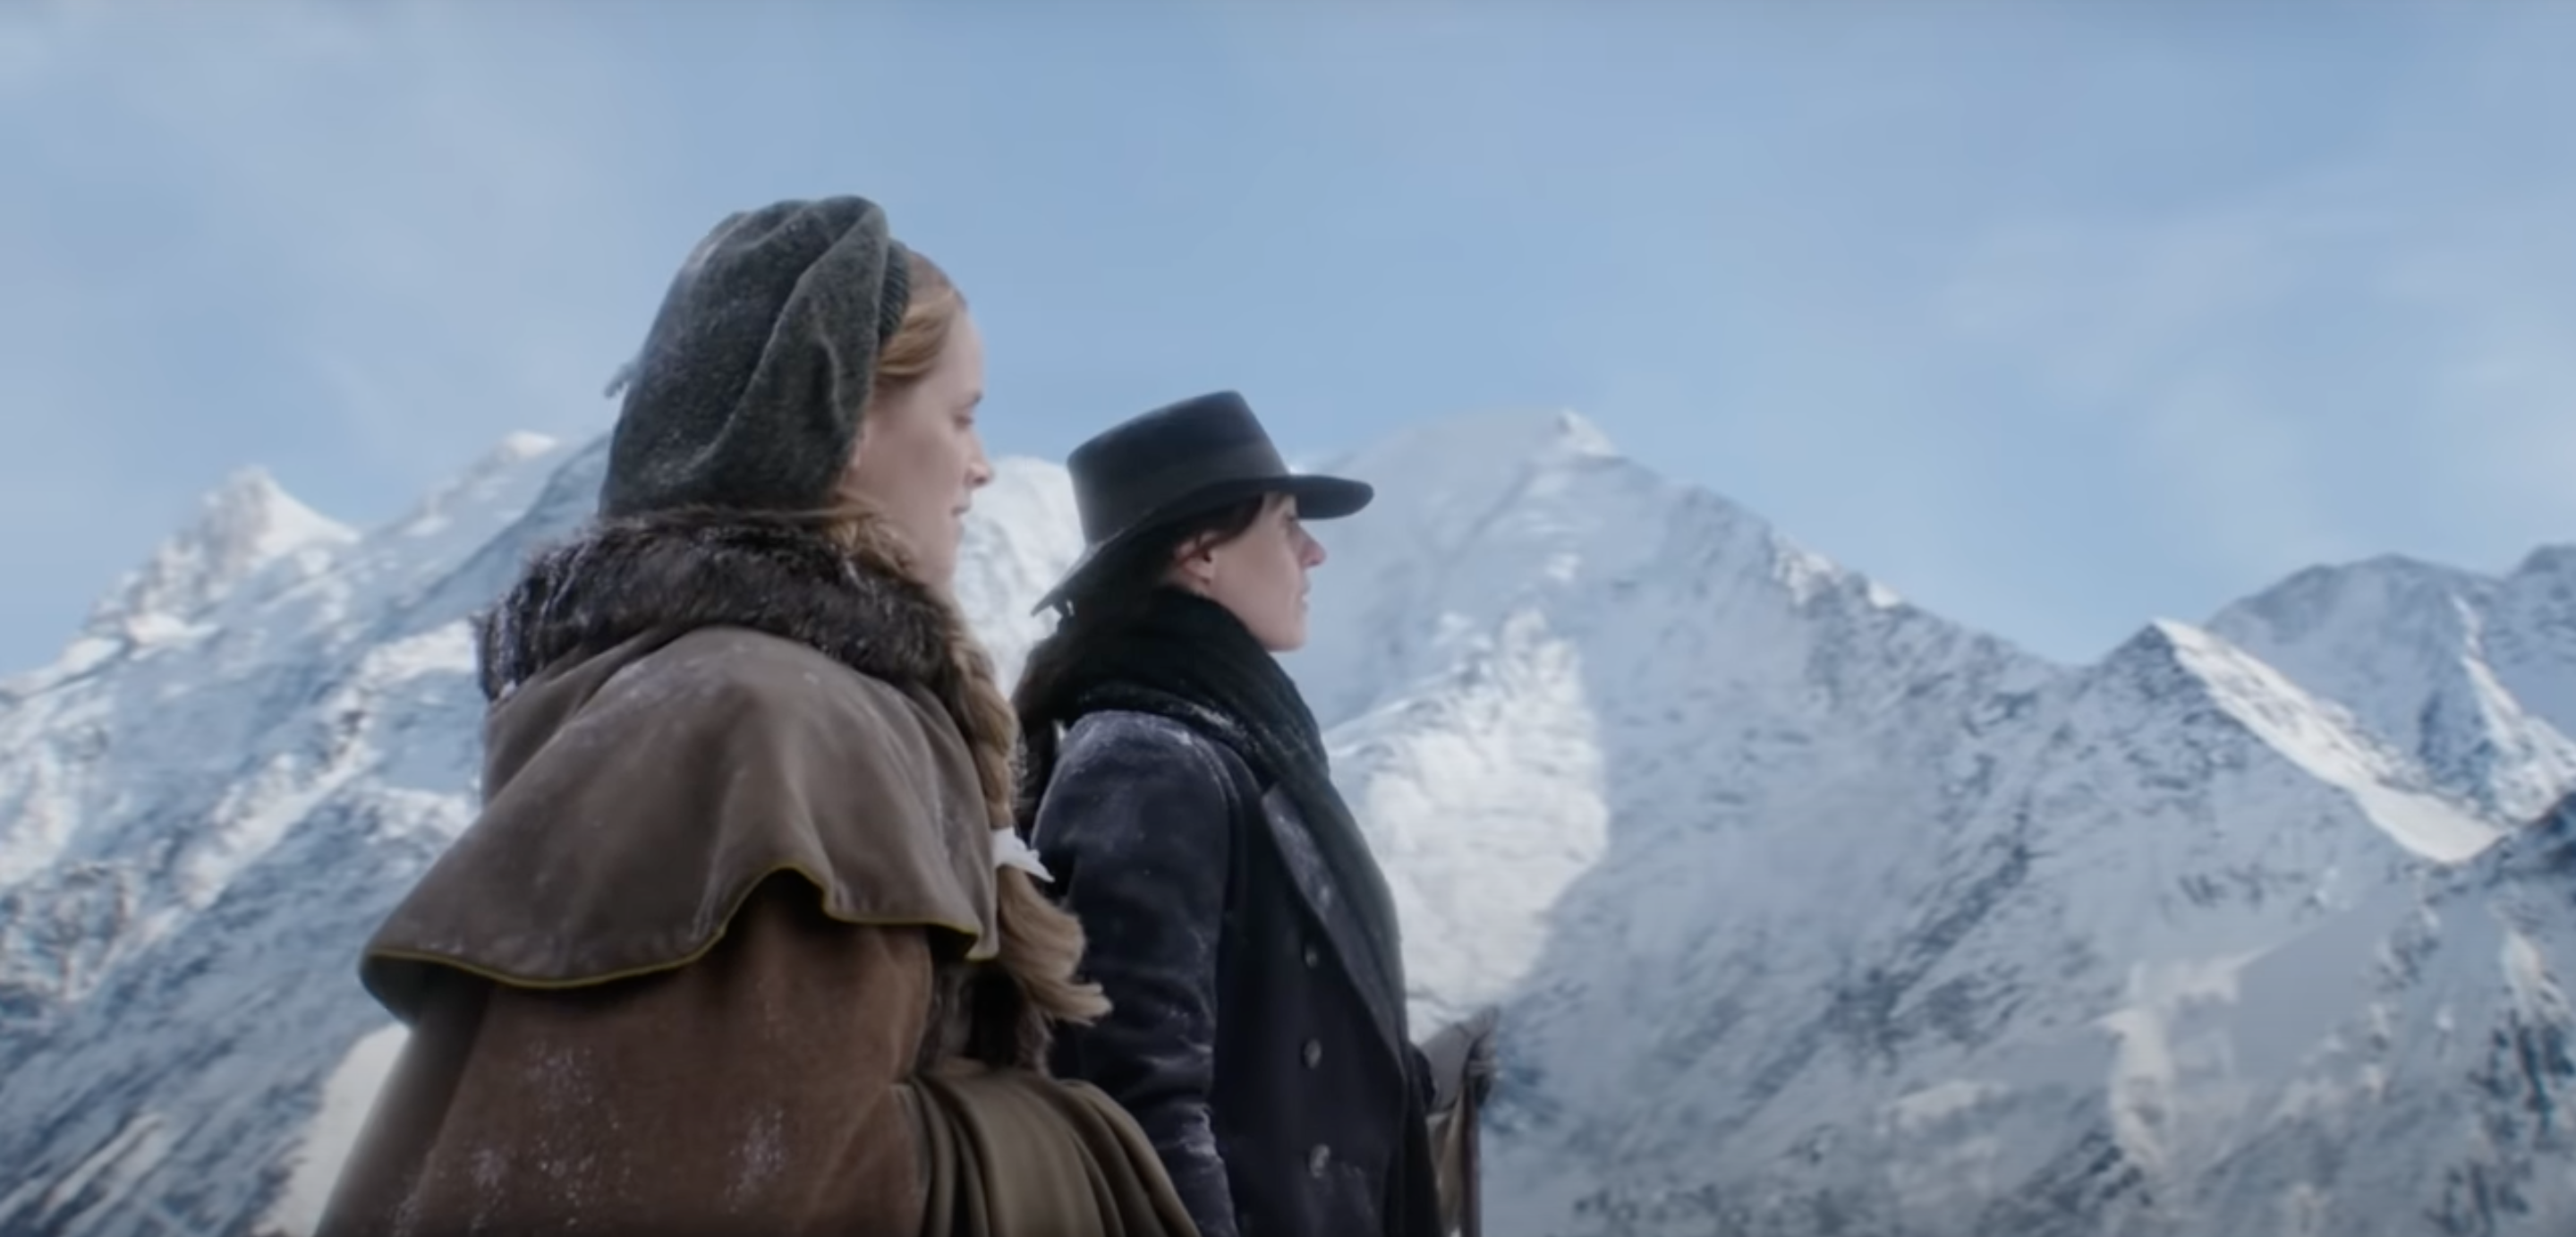 Trailer Watch: Anne Is at the Center of a Love Triangle in “Gentleman Jack” Season 2